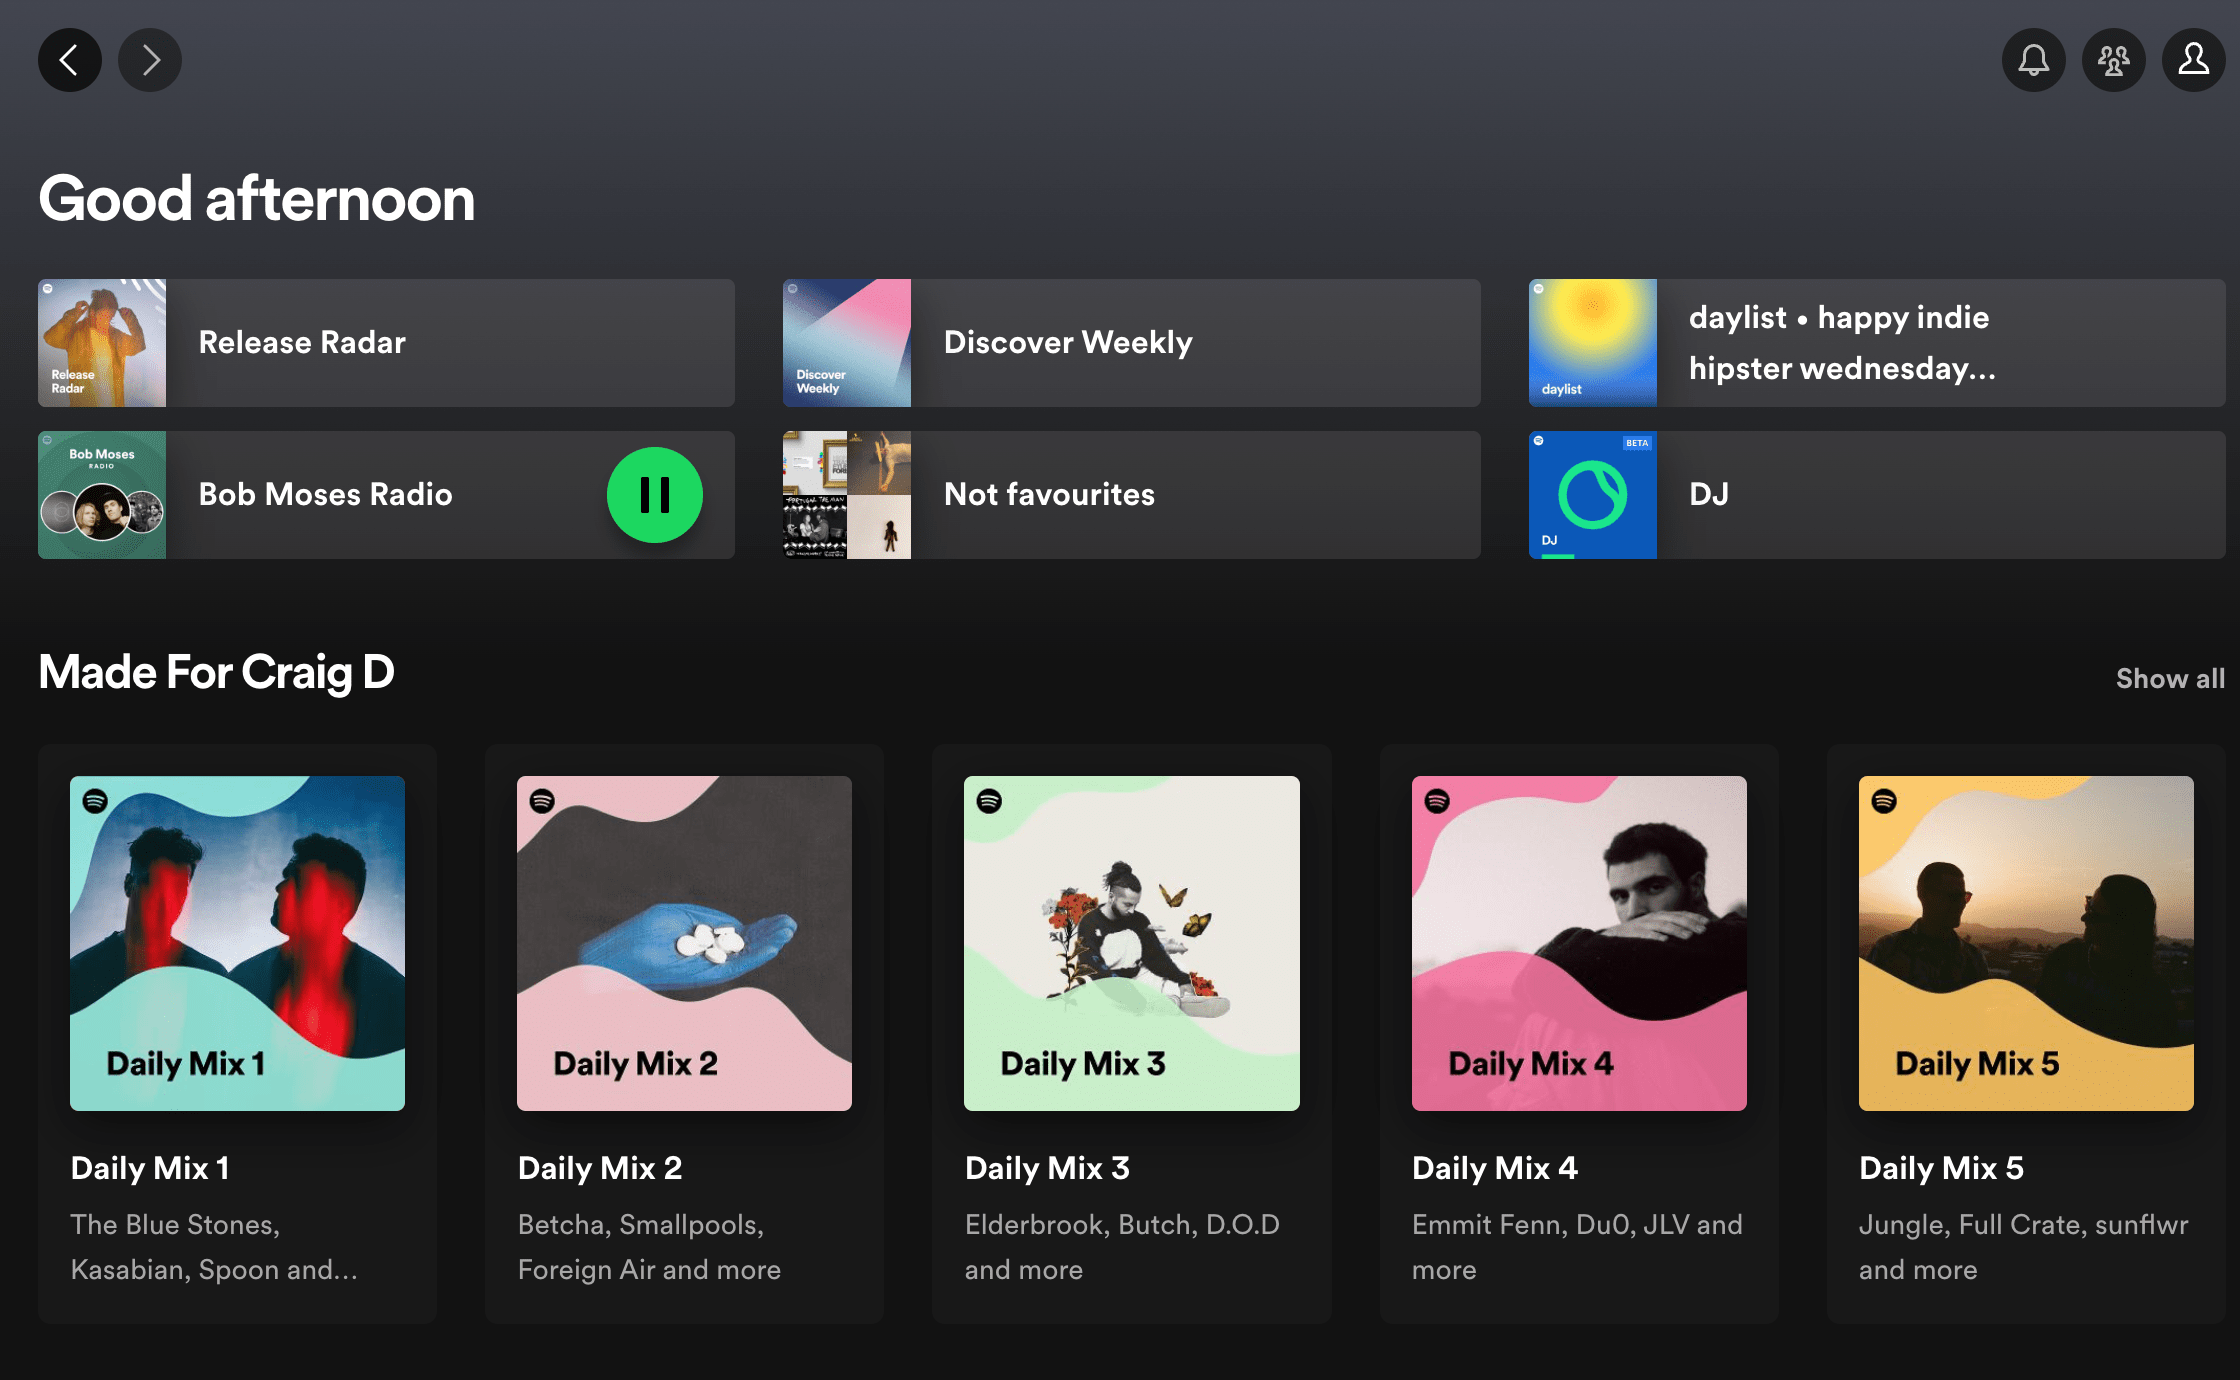 The Spotify dashboard showing recommendations from the data collected from event tracking